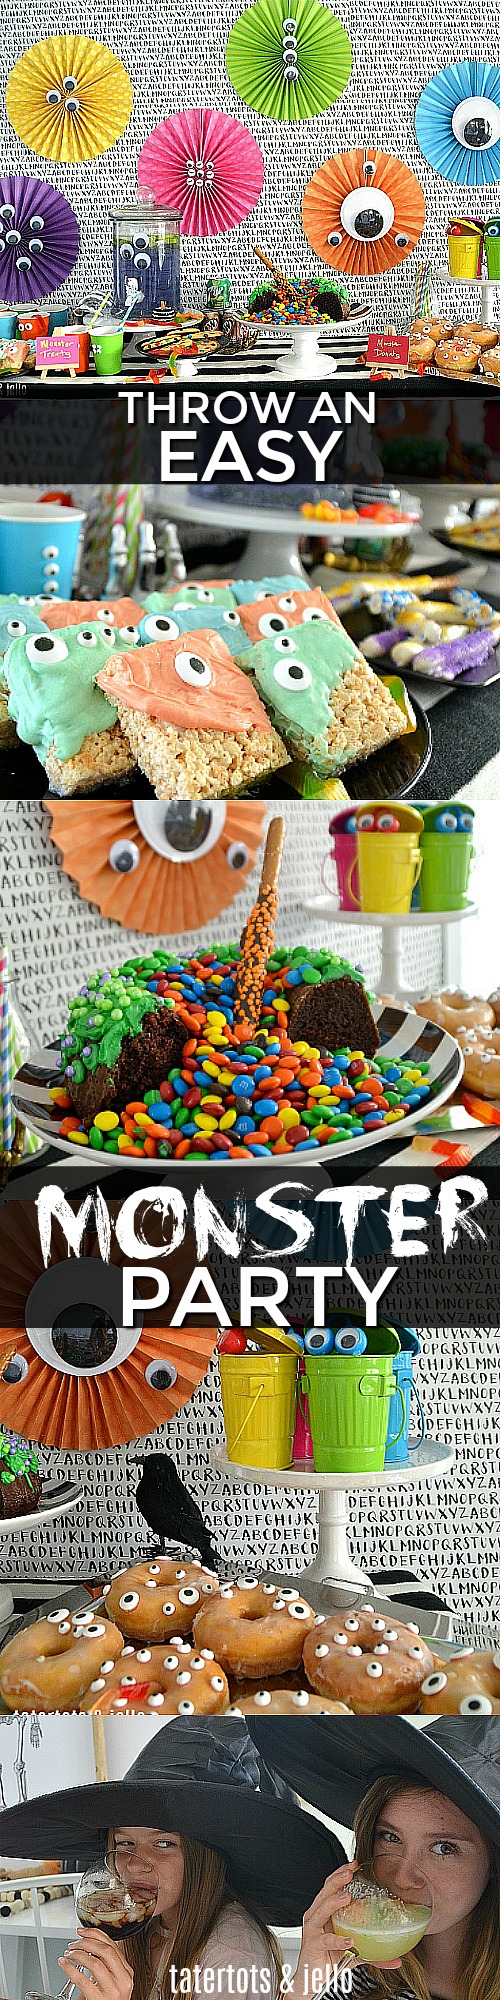 Throw an easy Monster party - food, decorations and more Halloween